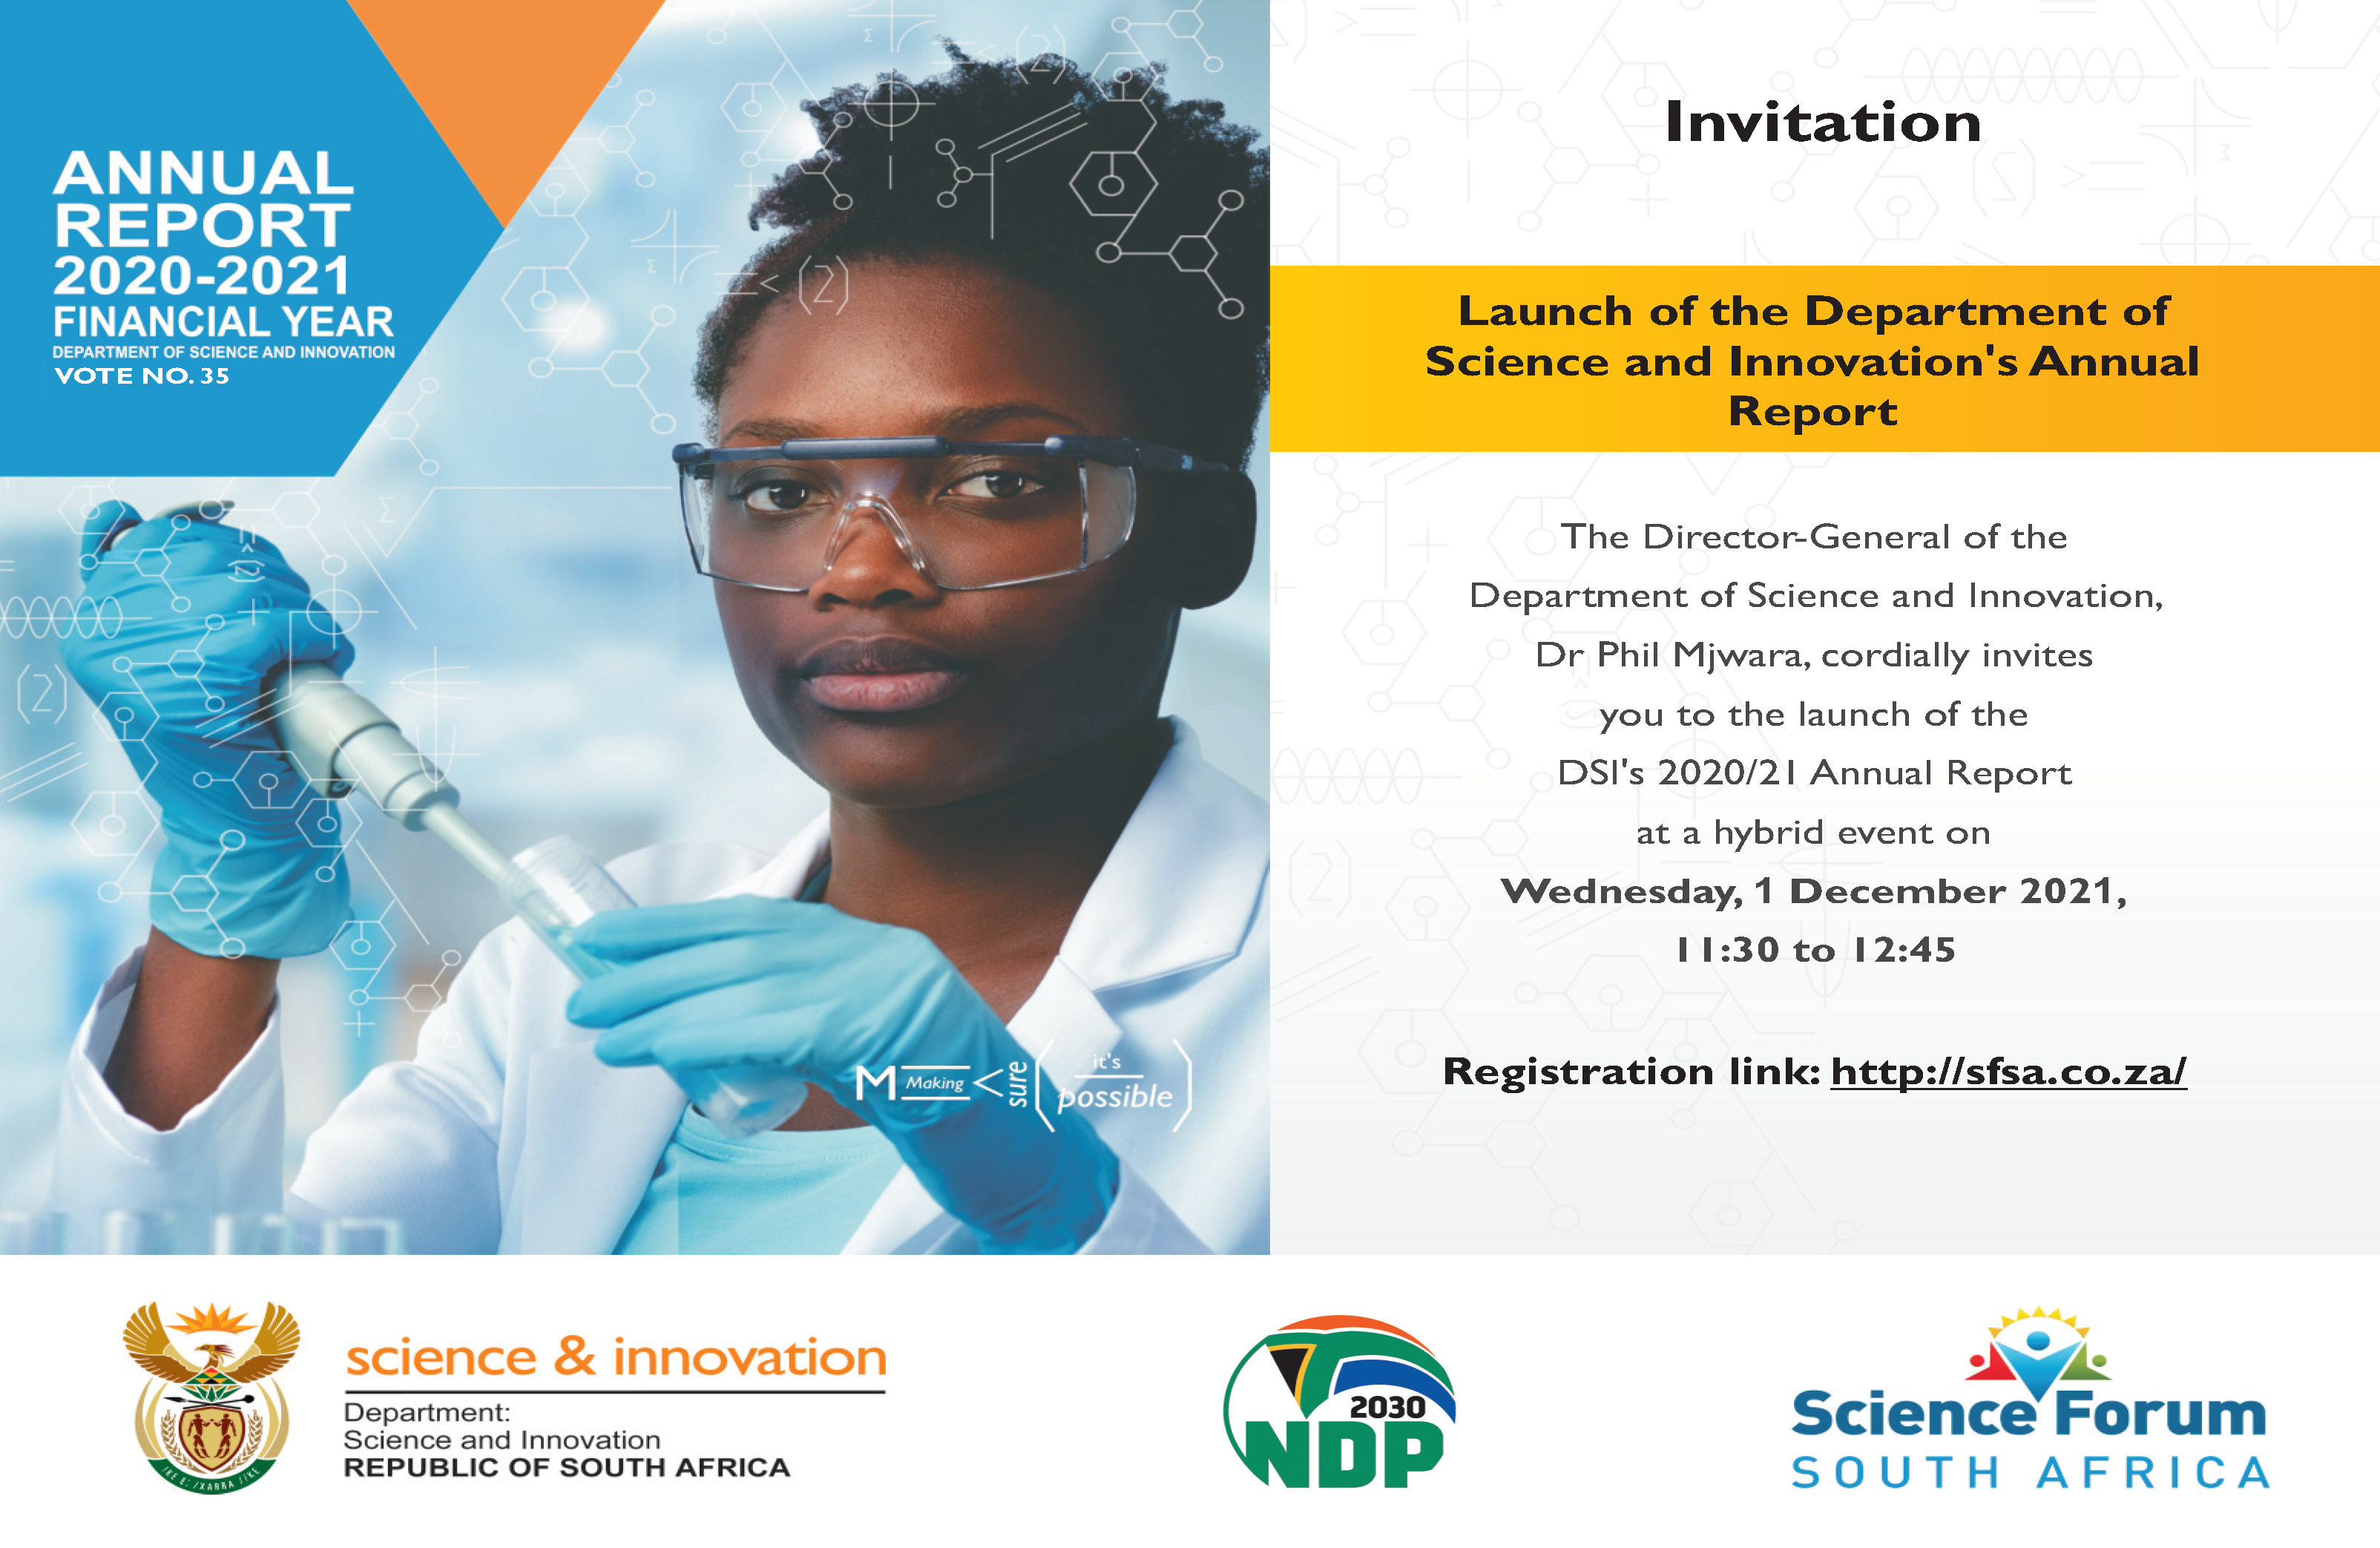 Launch of the Department of Science and Innovation's Annual Report